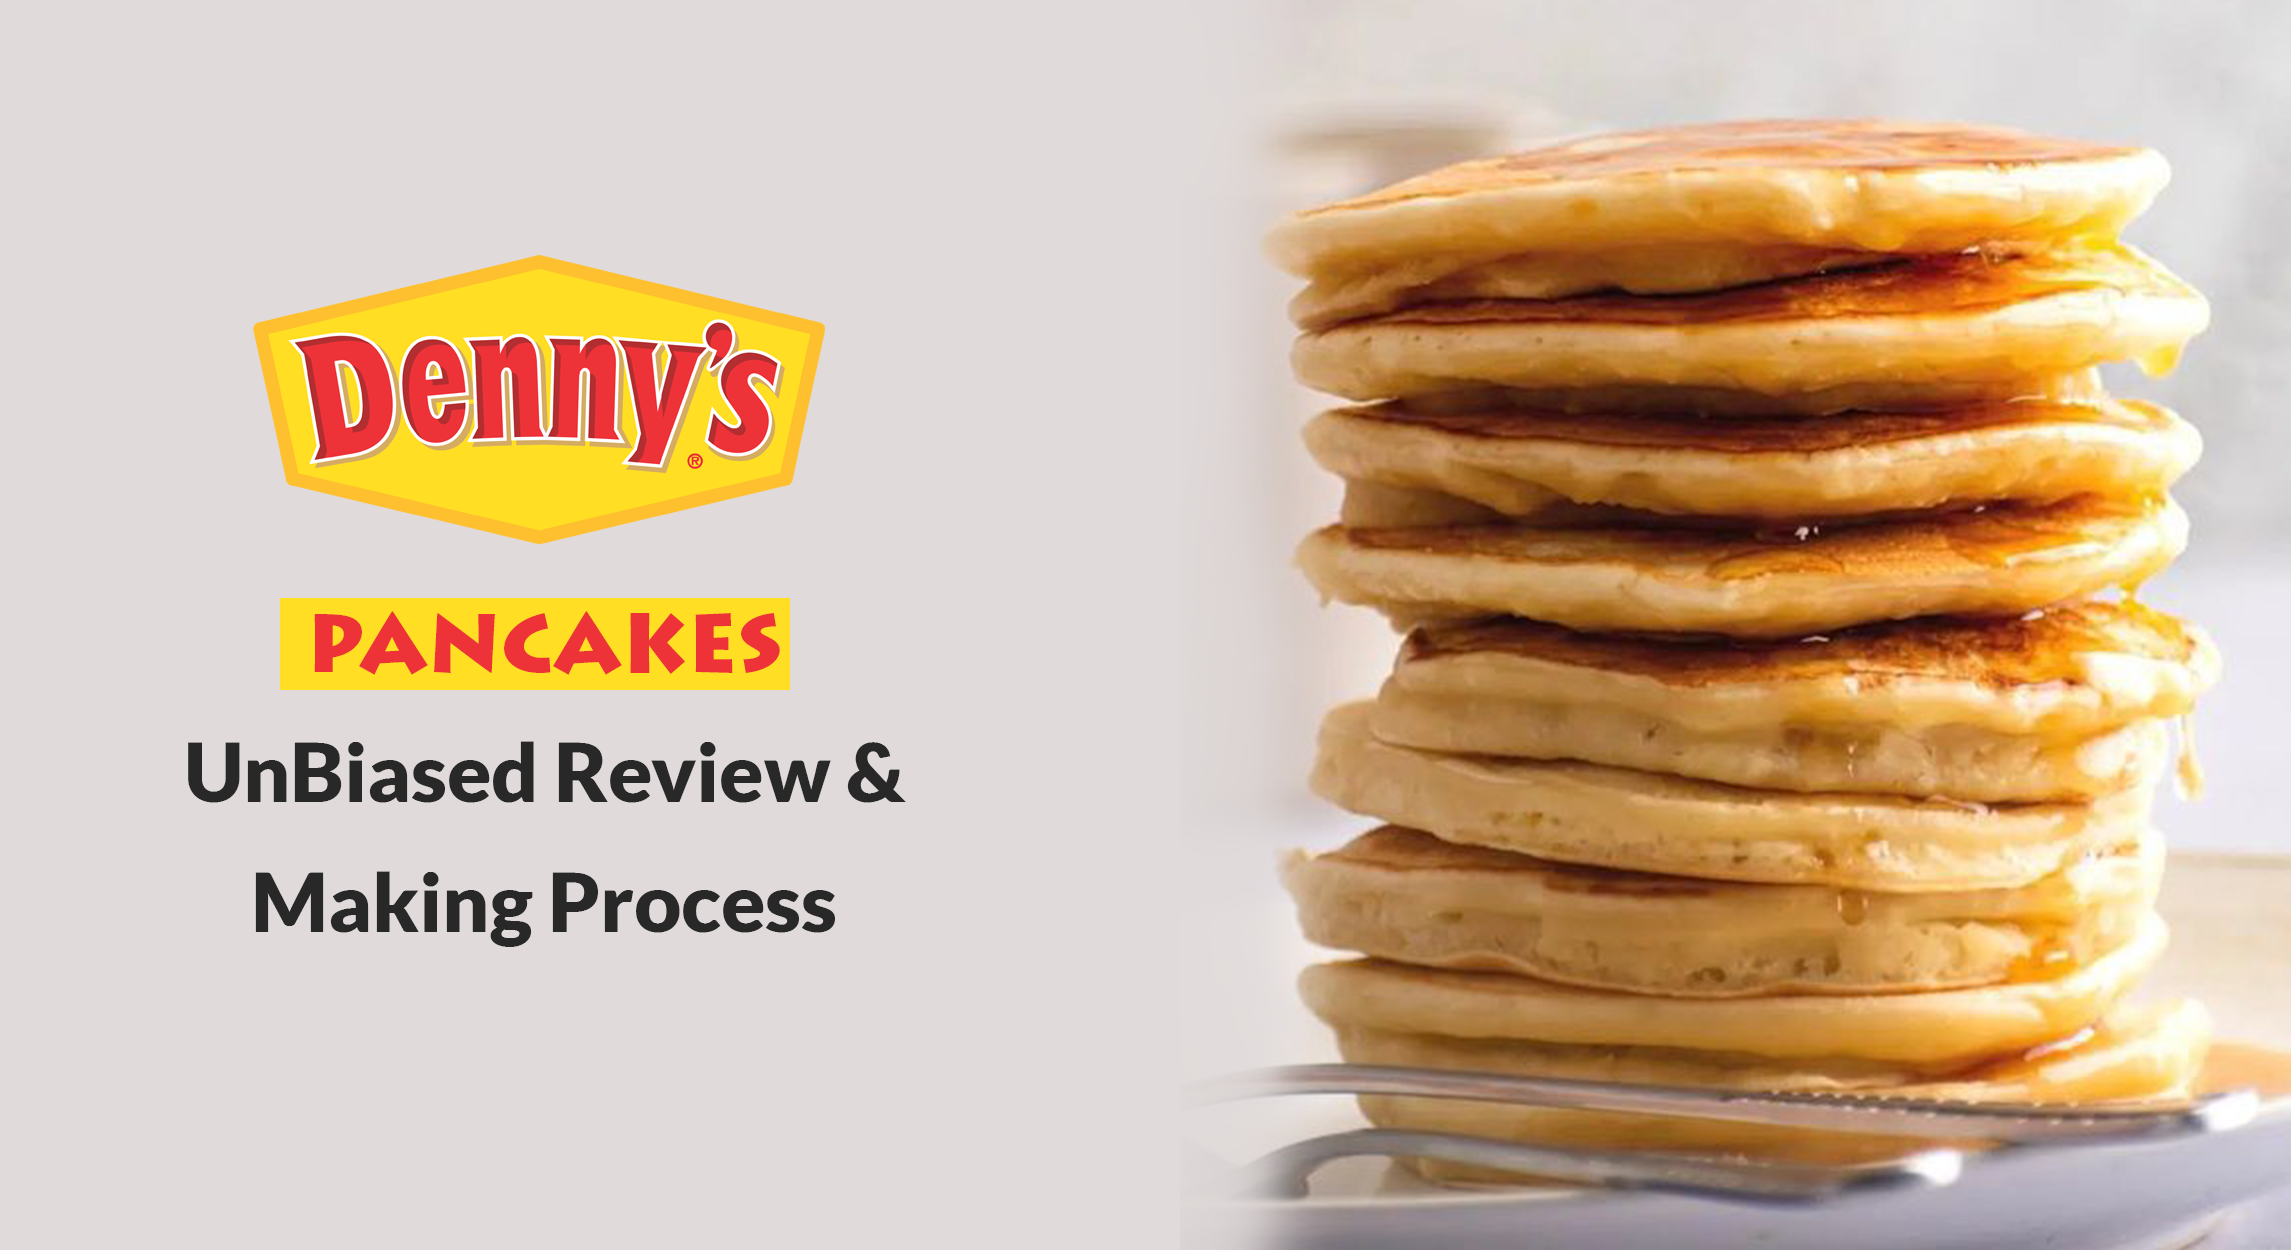 Denny's pancakes- UnBiased Review And Making Process